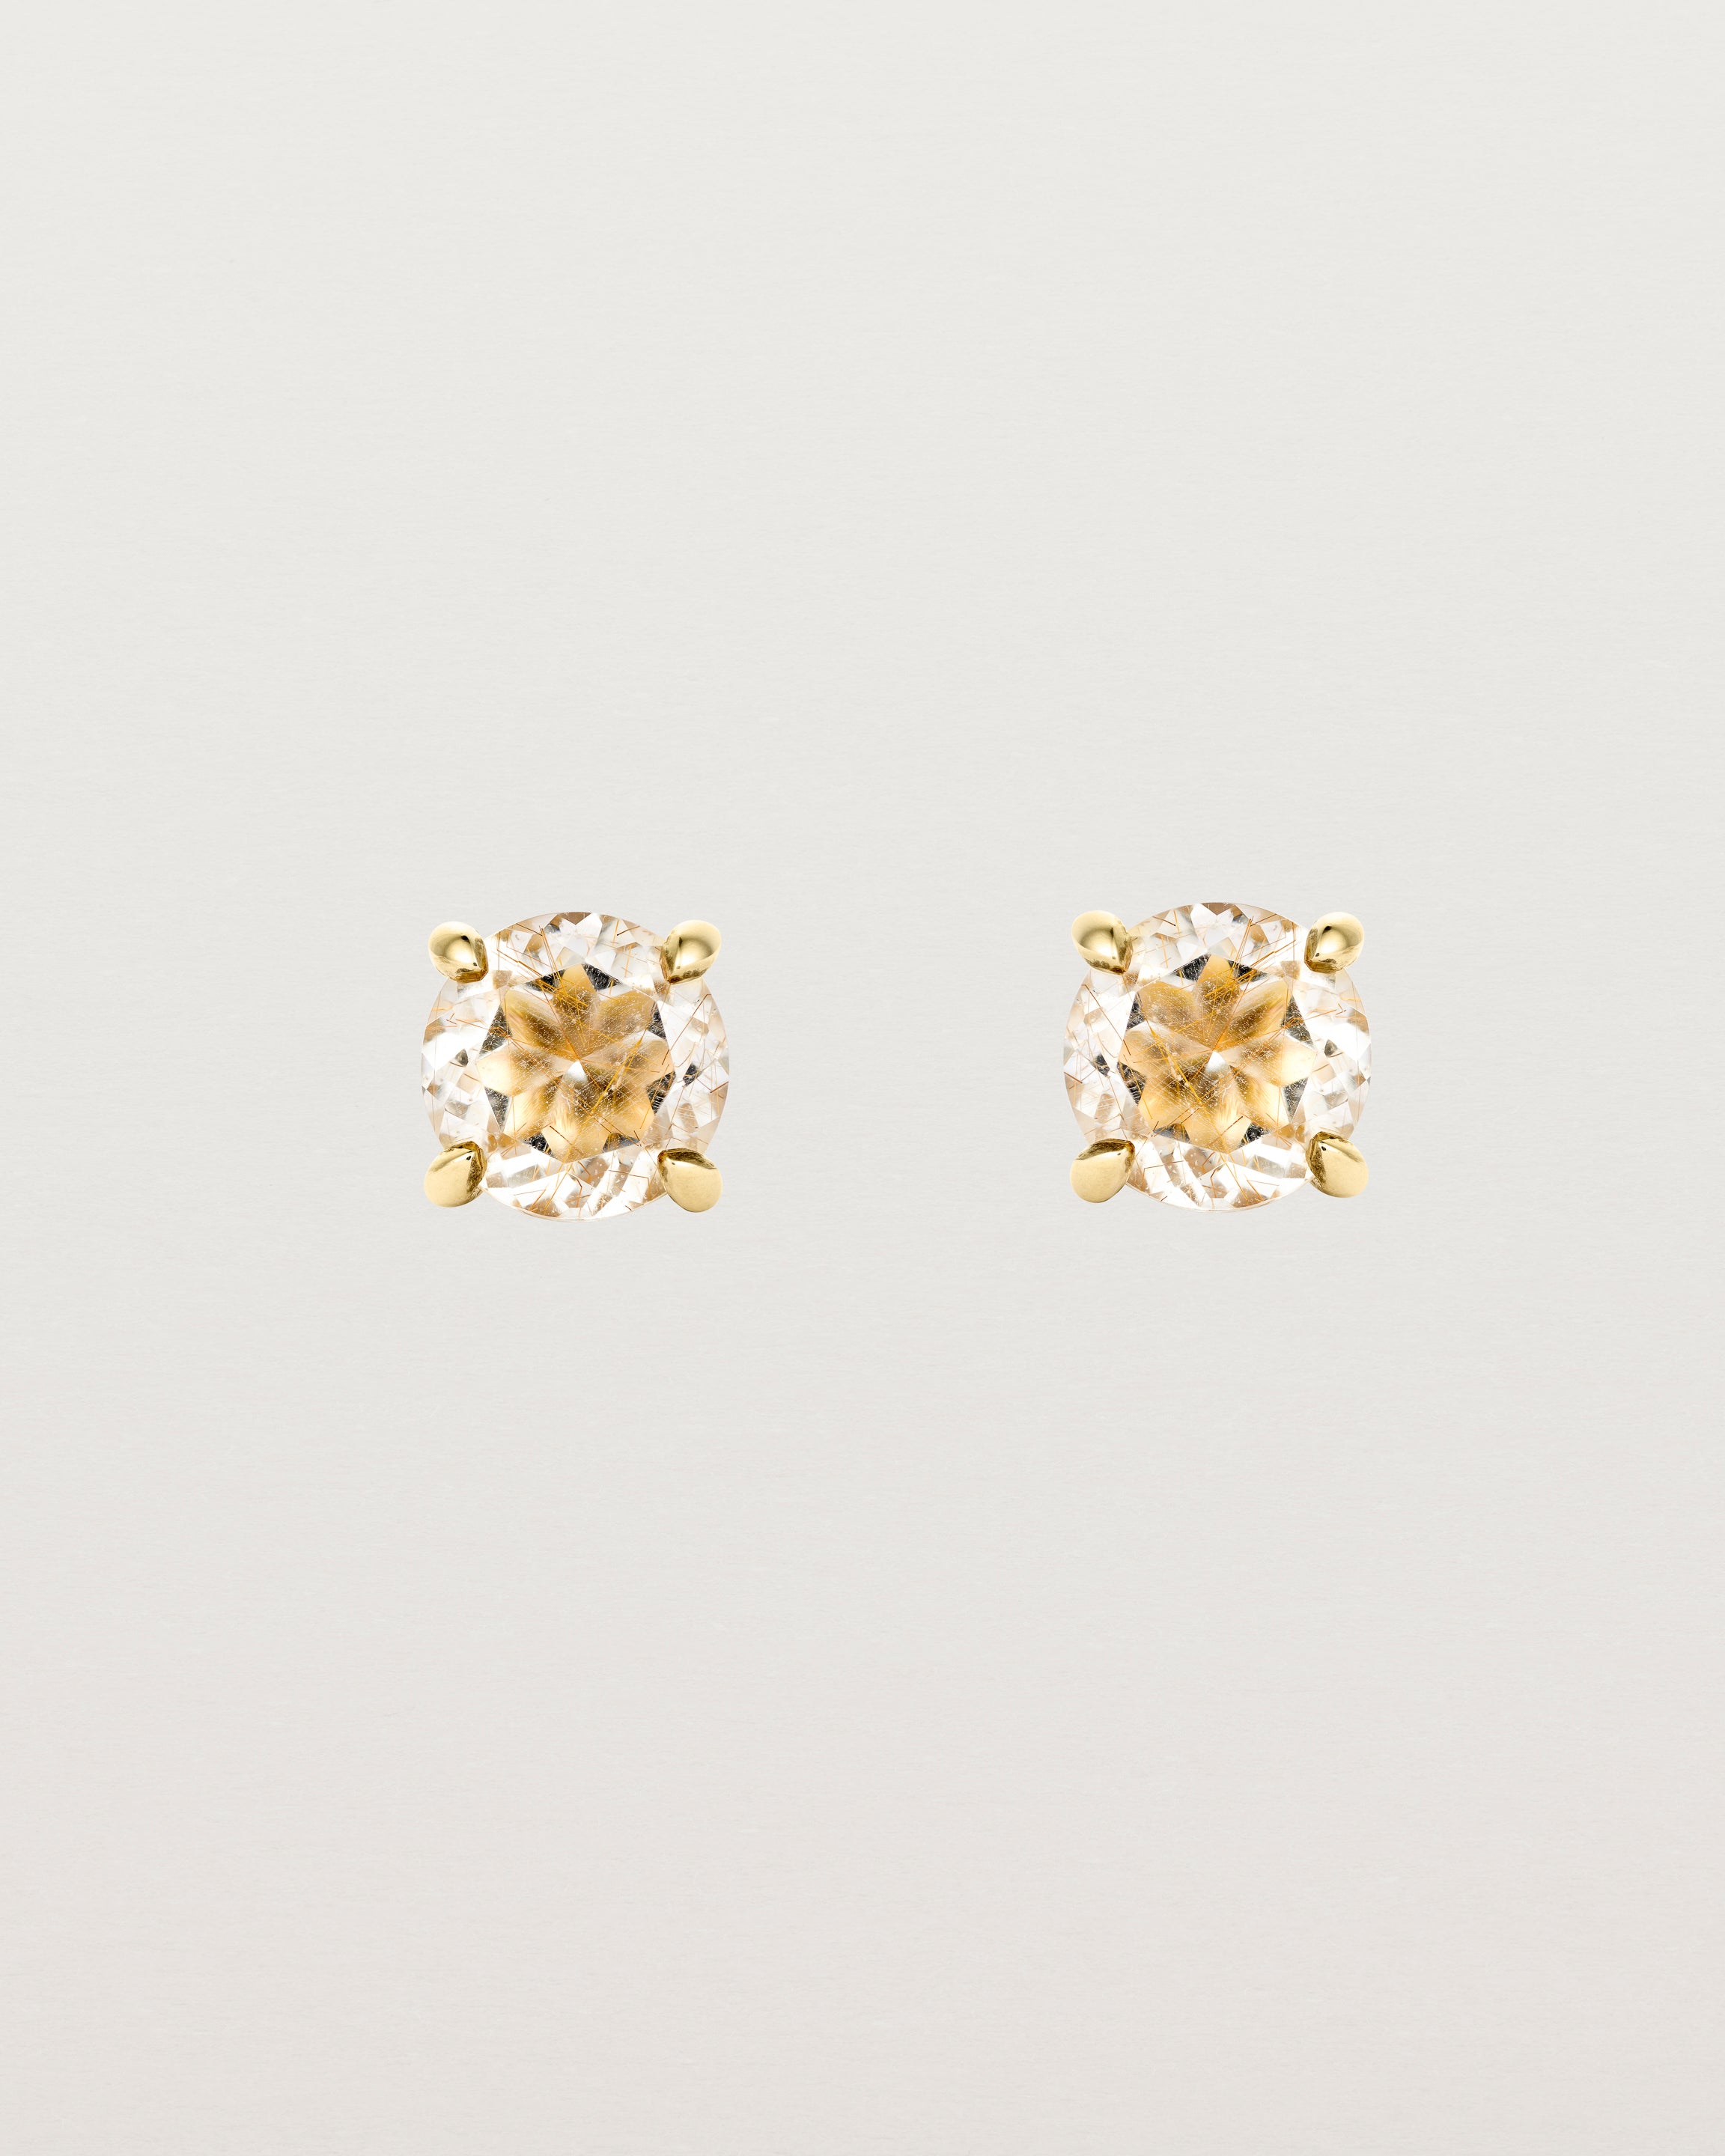 A pair of yellow gold studs featuring a round cut light yellow rutilated quartz stone